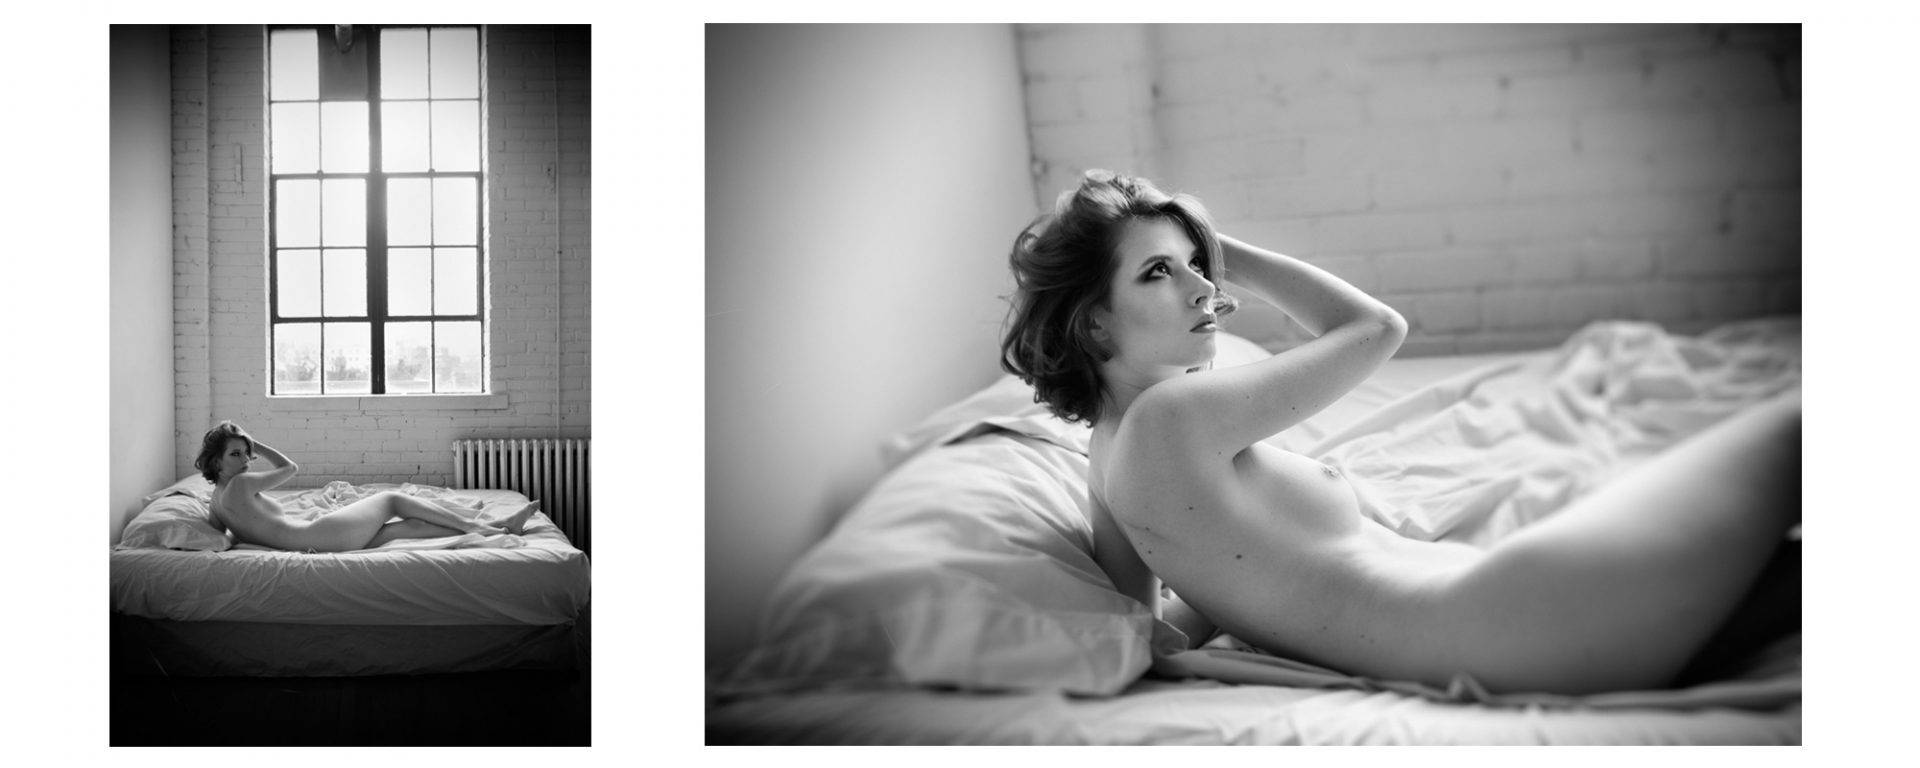 Female artistic nude photos on bed in an industrial studio with big windows in Toronto.